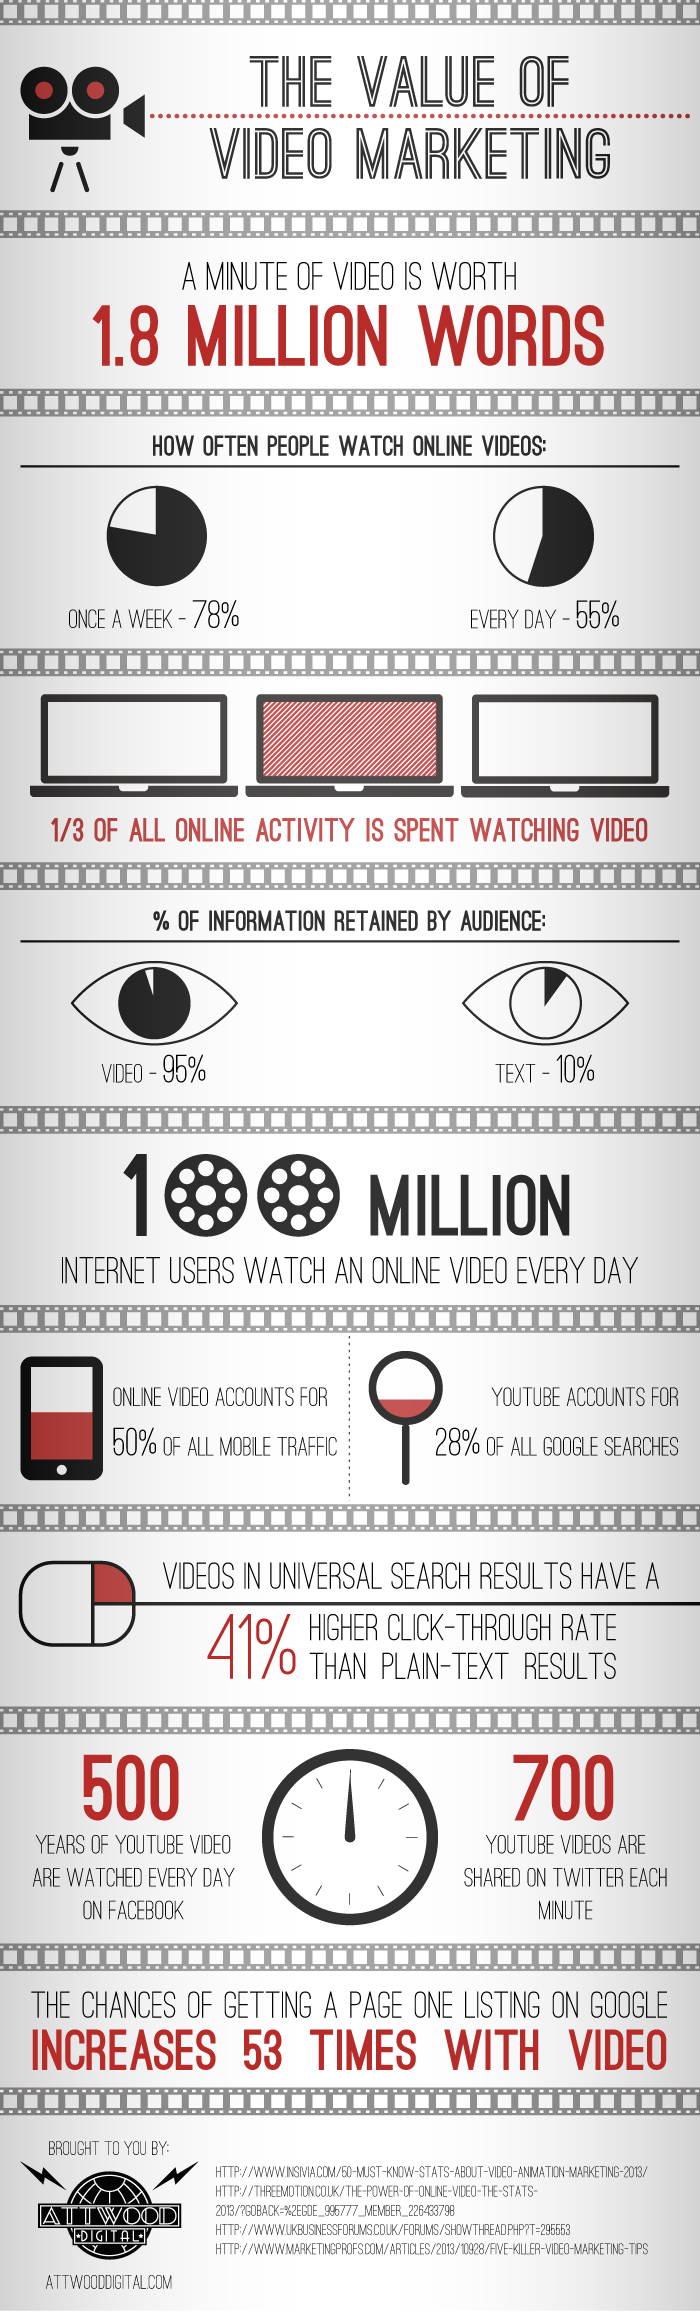 The value of video marketing